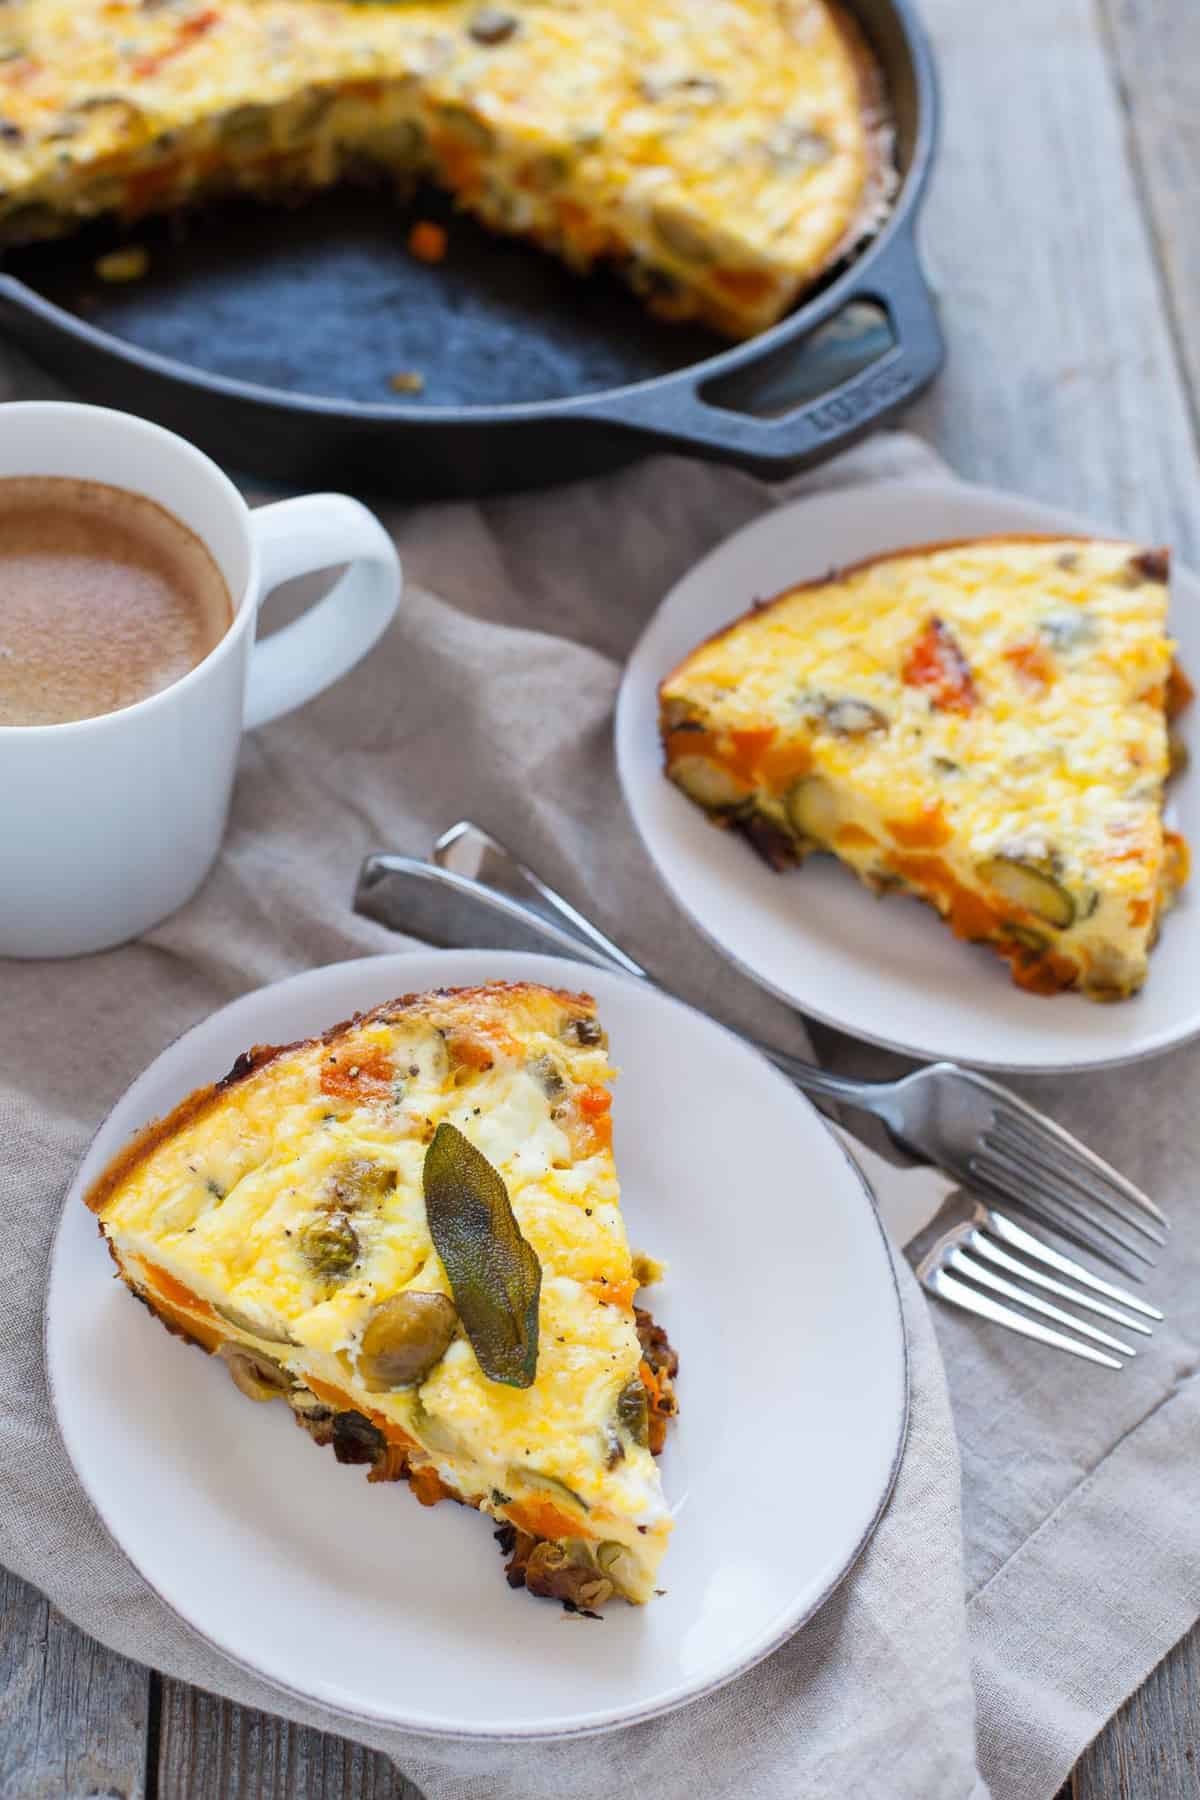 Searching for a post-holiday dish that will use up all your leftovers? Enter the Thanksgiving Breakfast frittata, packed with butternut squash, Brussels sprouts and sage. Perfect for the morning after Thanksgiving!